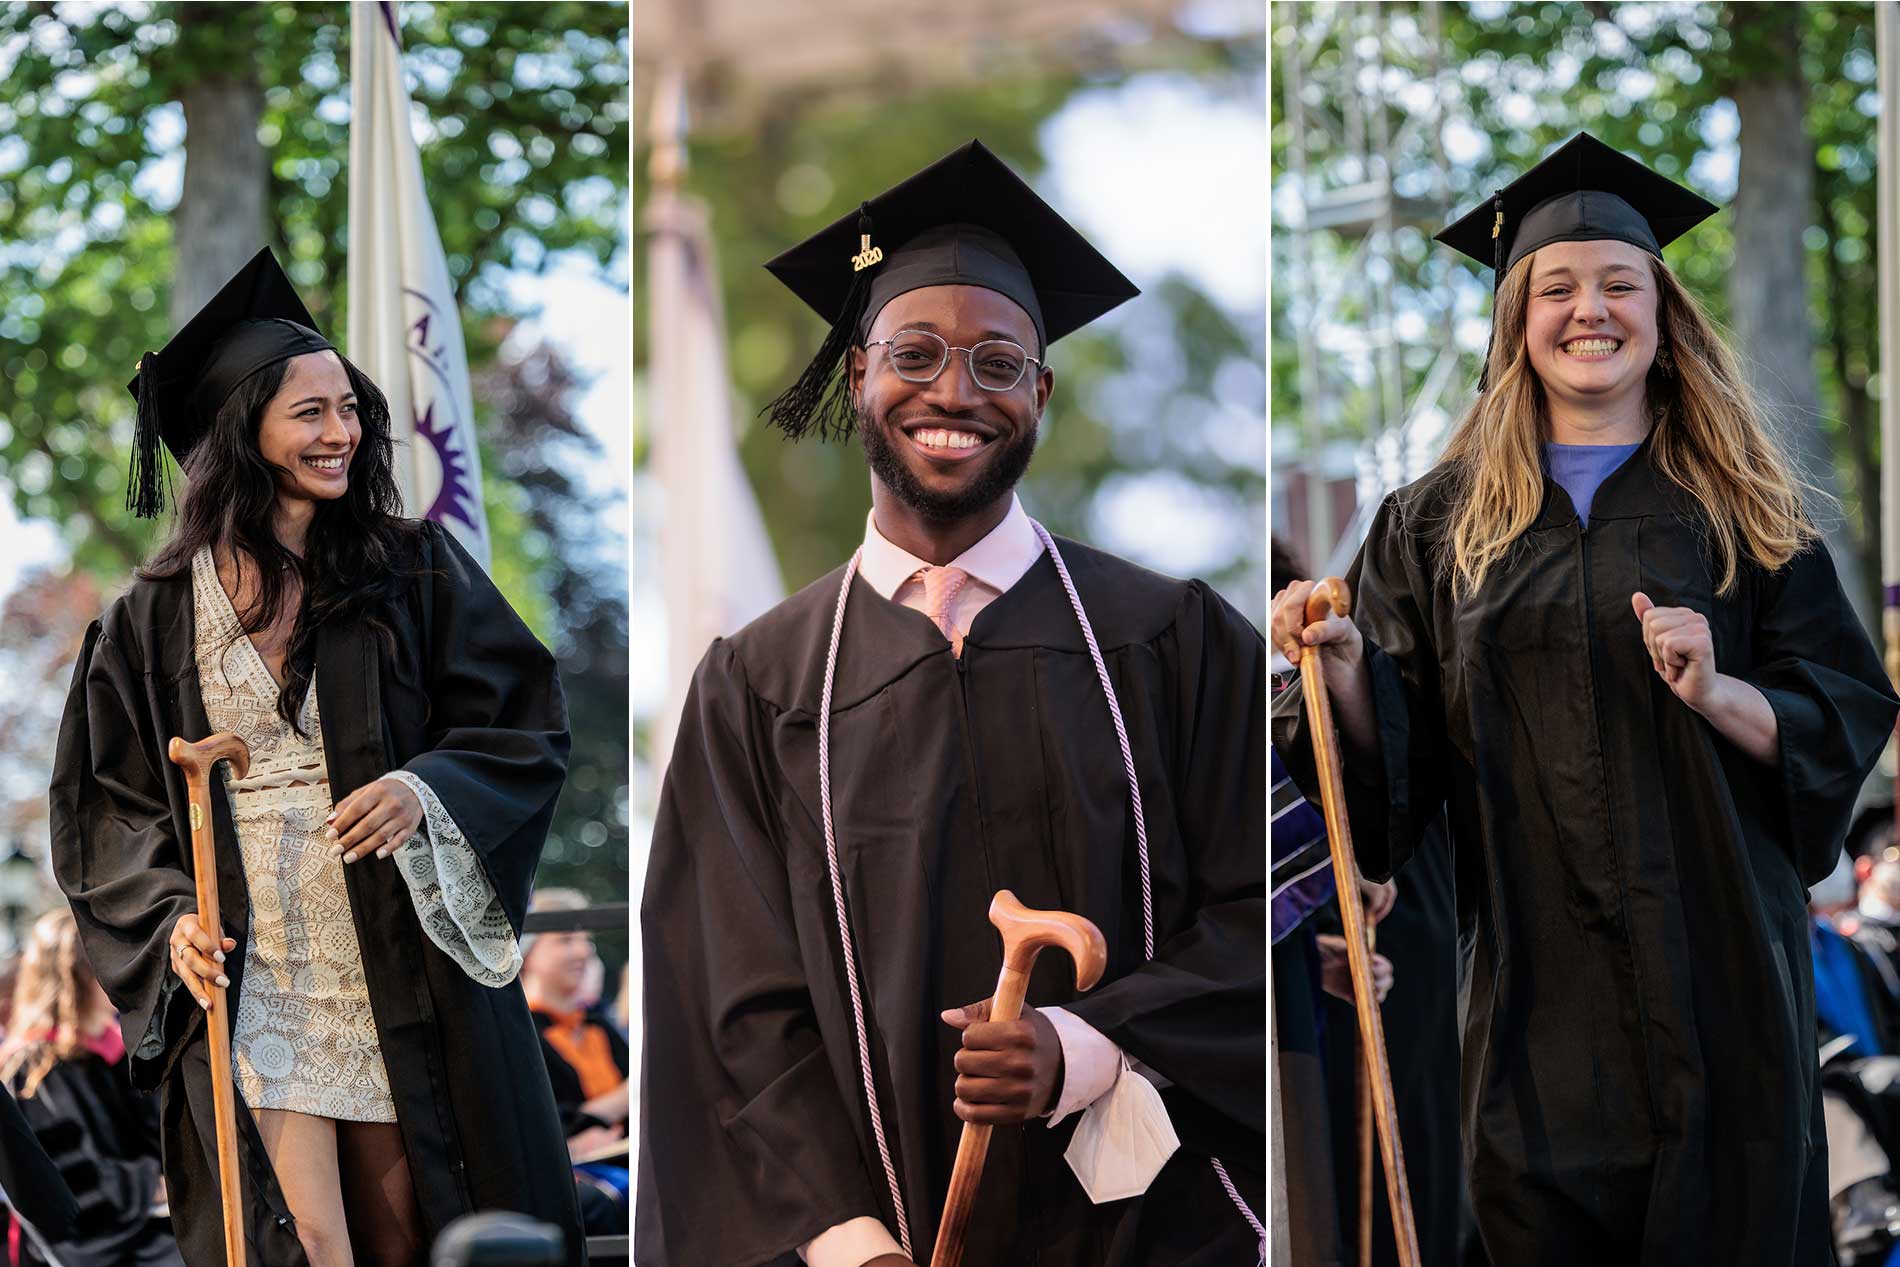 Three students smile after receiving their diplomas.